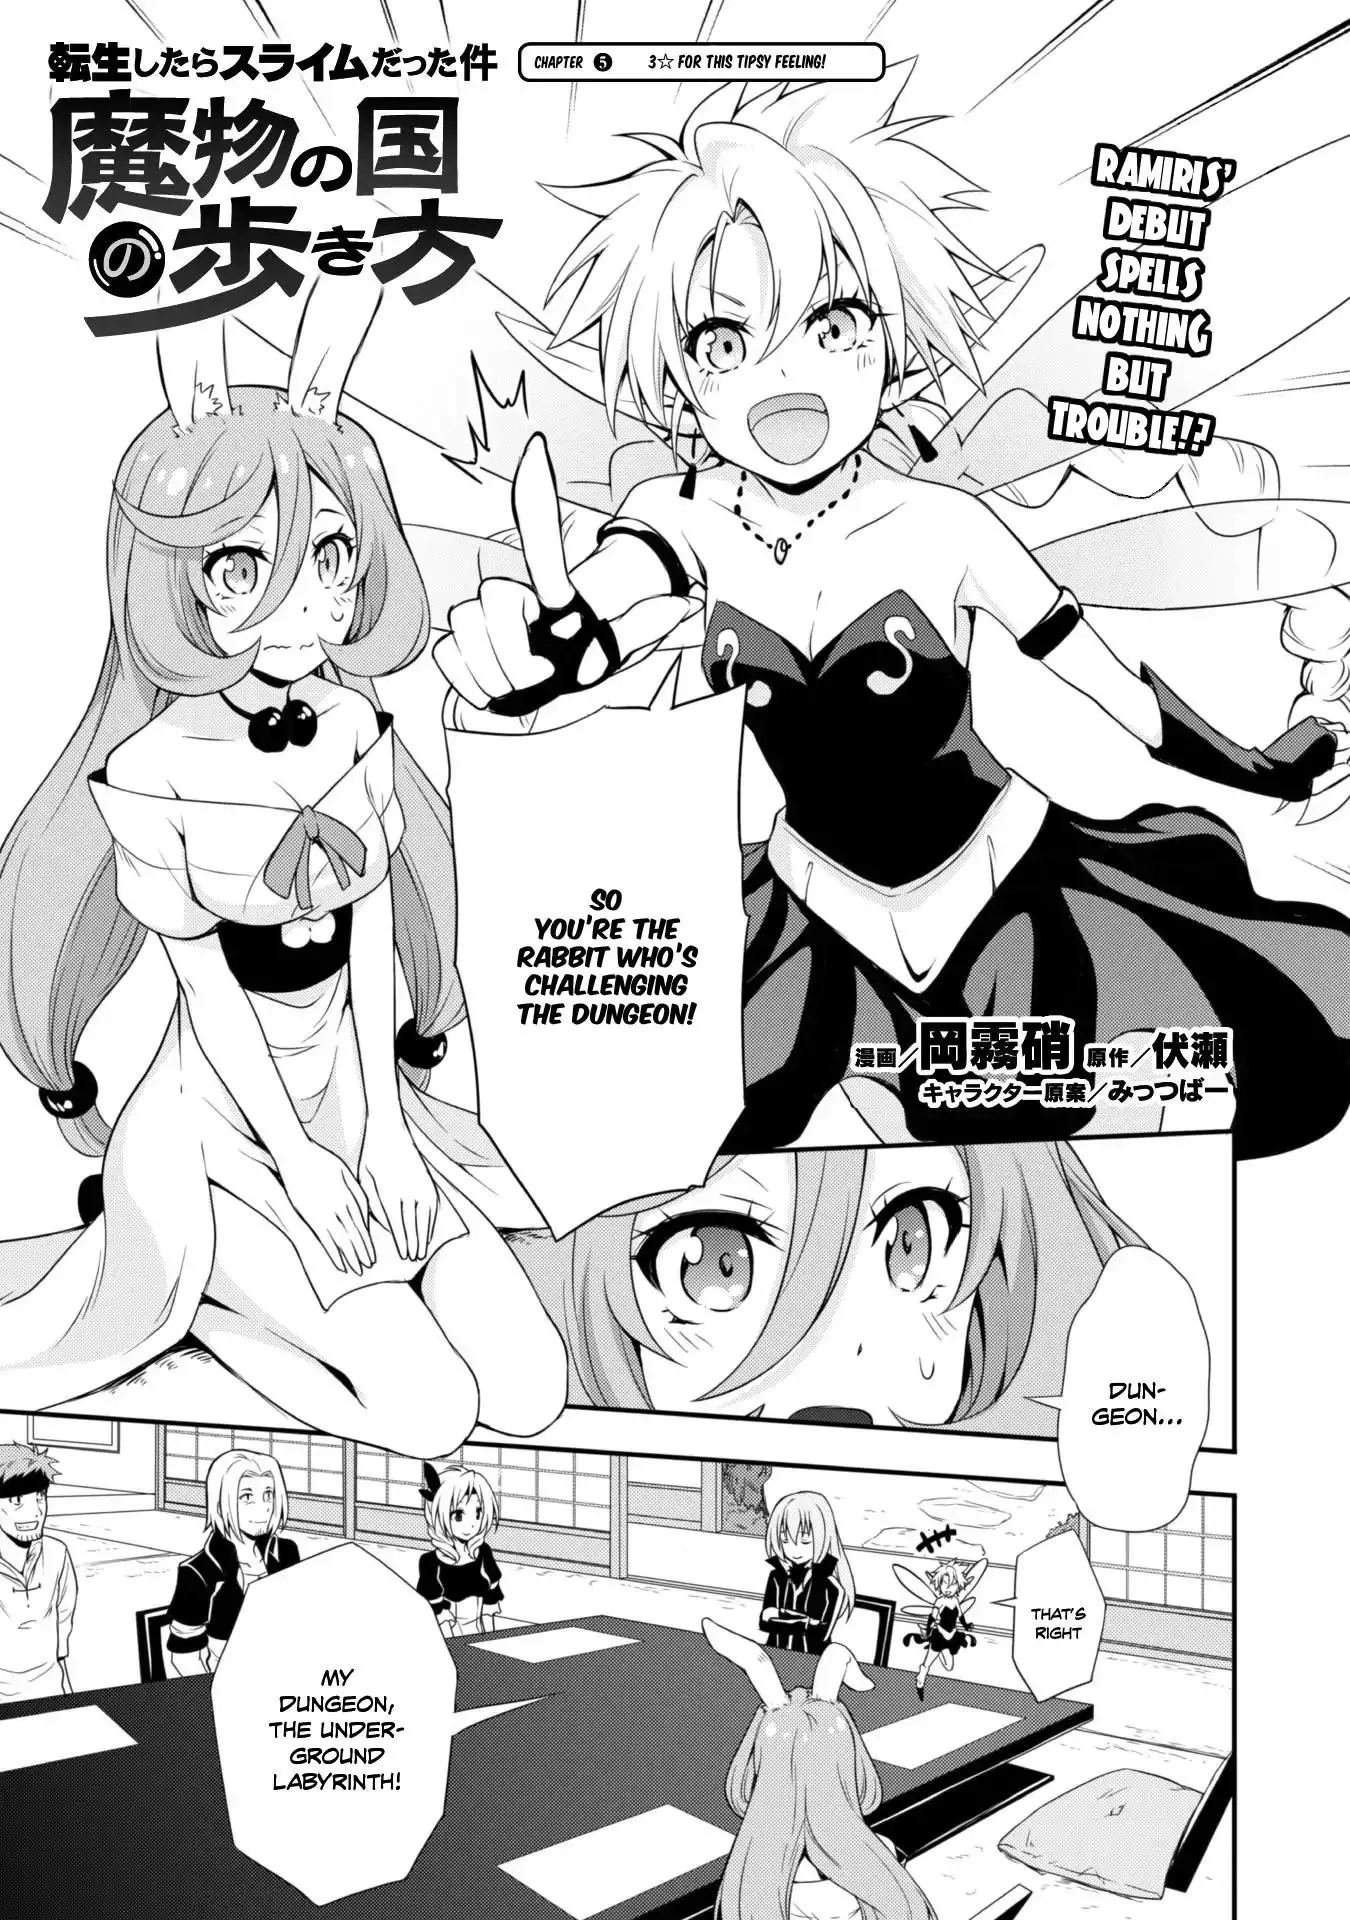 Tensei Shitara Slime Datta Ken: The Ways of Strolling in the Demon Country - 5 page 2